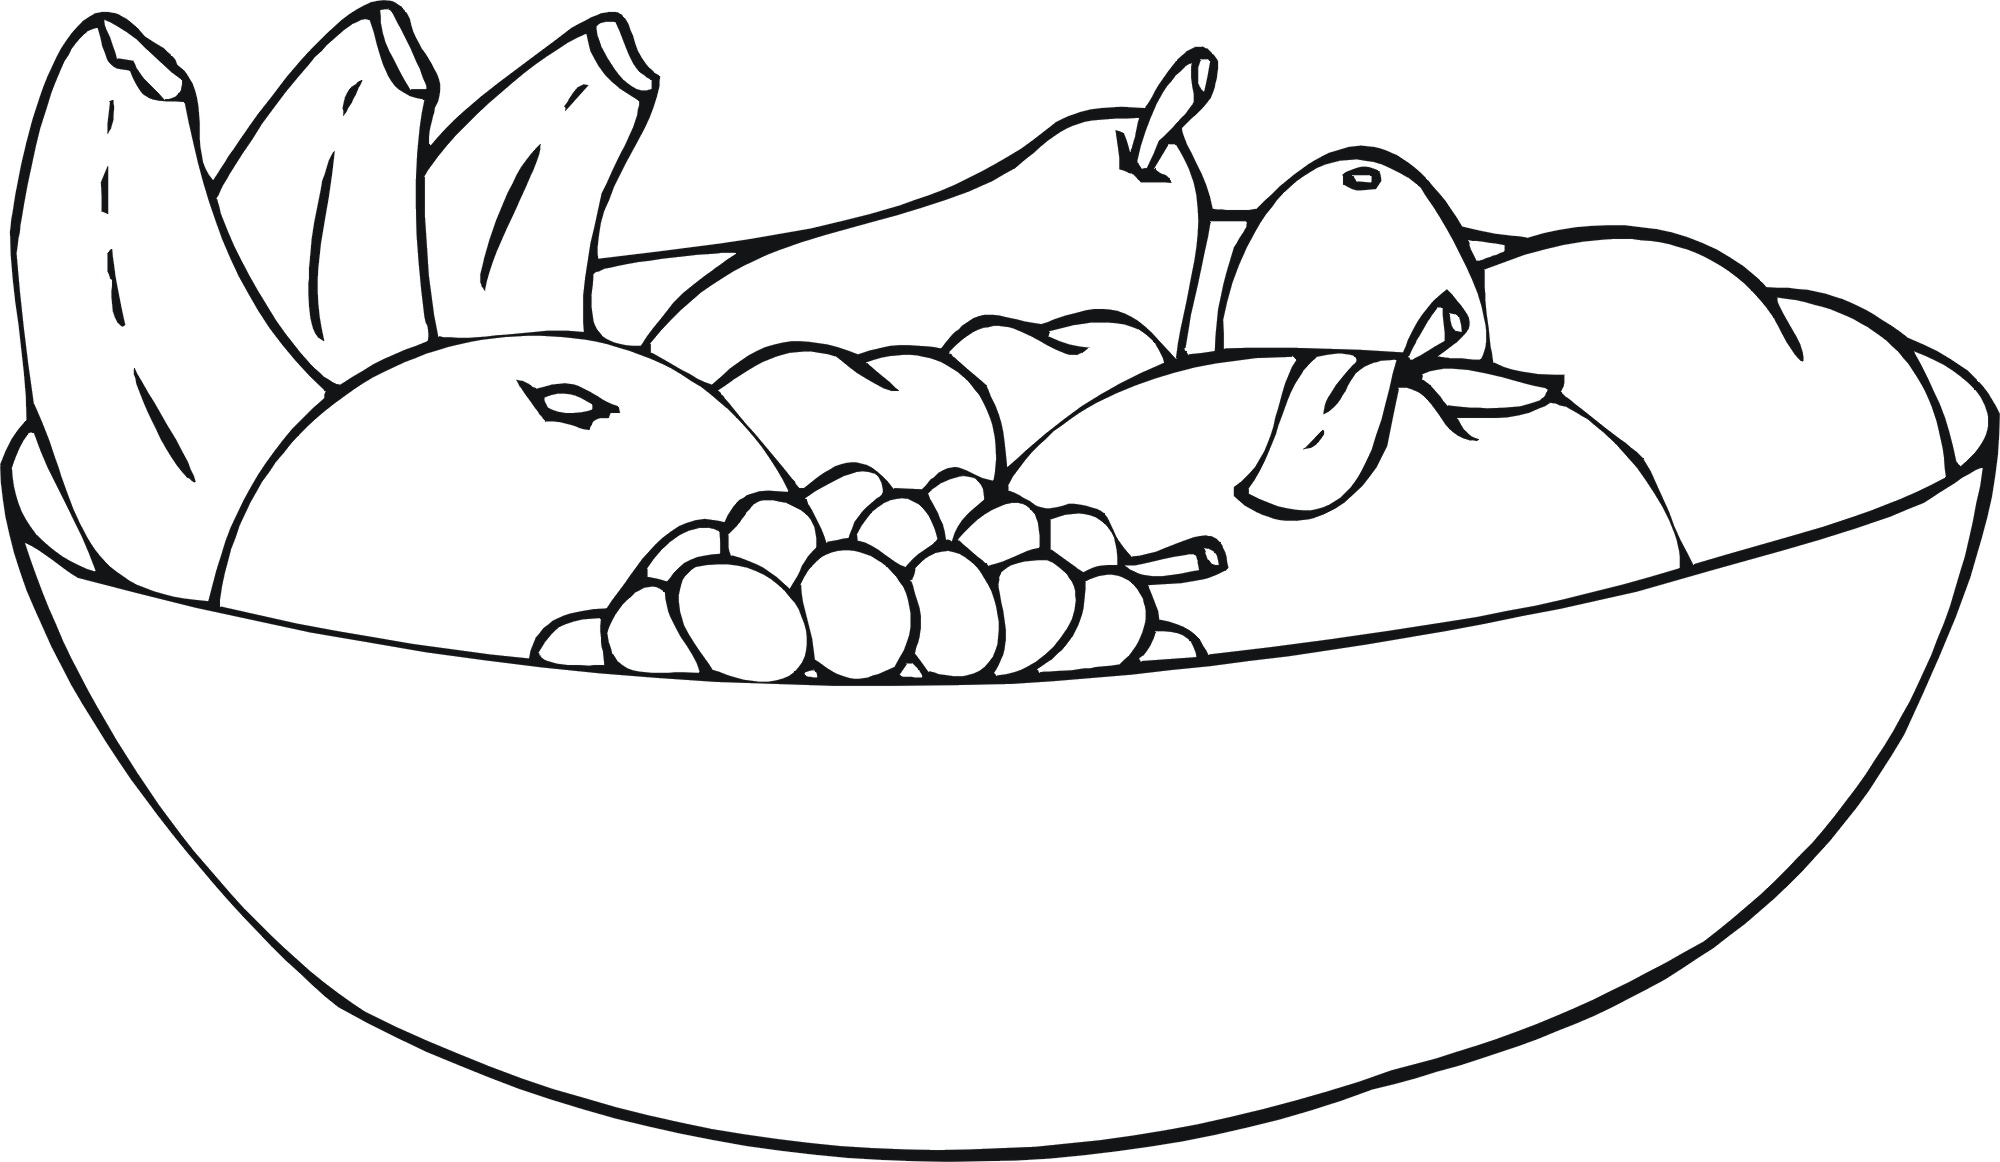 coloring pages fruit get this printable fruit coloring pages online 55459 coloring pages fruit 